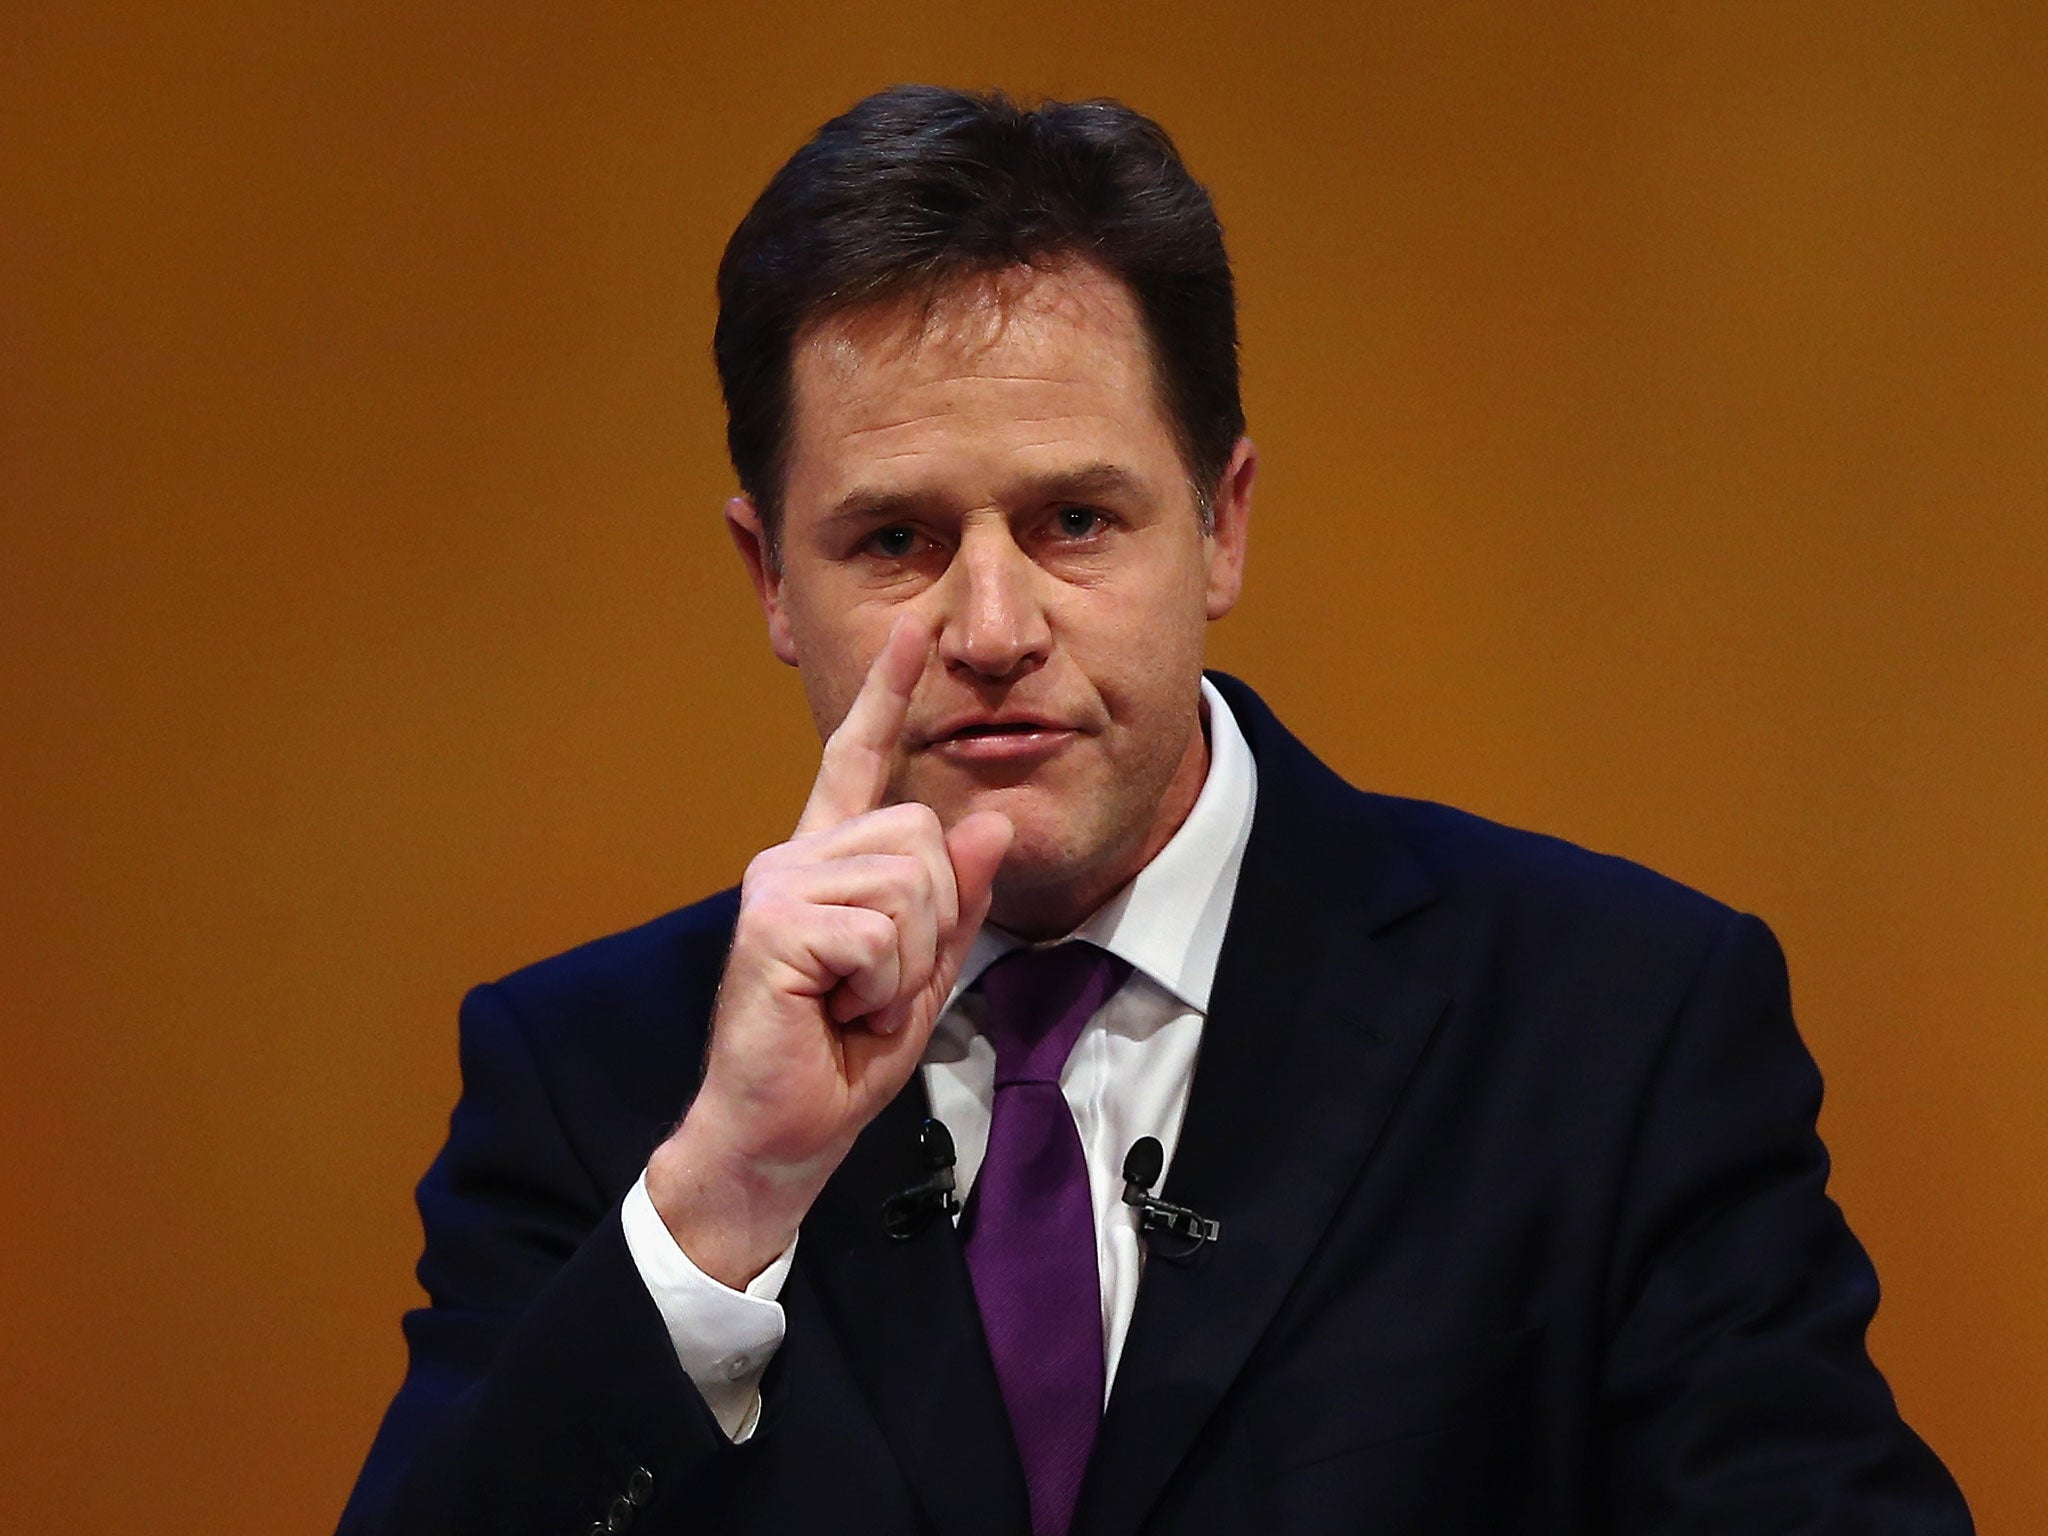 Nick Clegg issued an apology in 2012 for backtracking over tuition fees